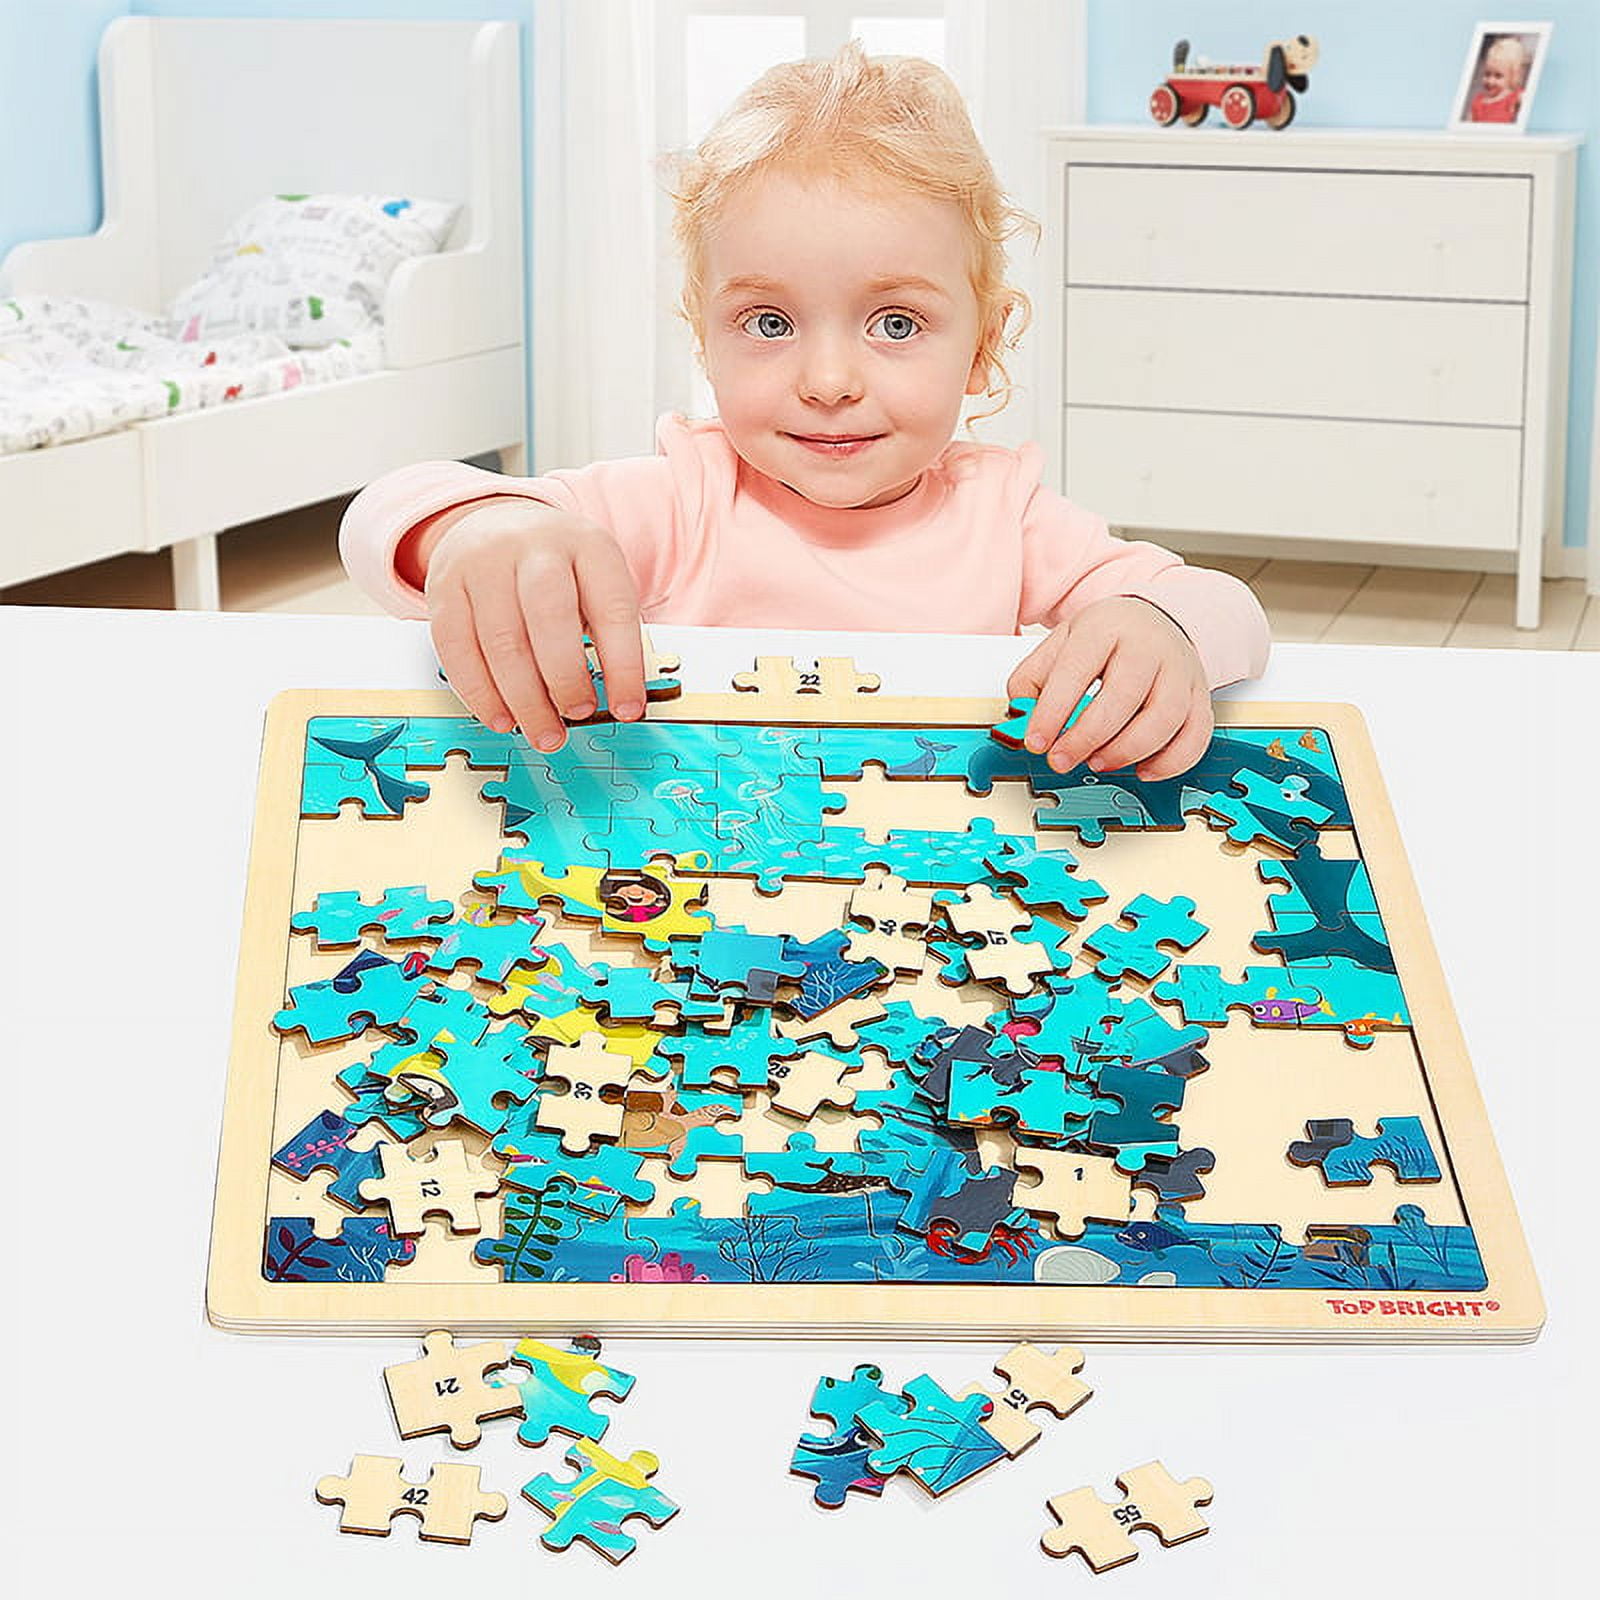  TOP BRIGHT 100 Piece Puzzles for Kids Ages 4-8 - Urban